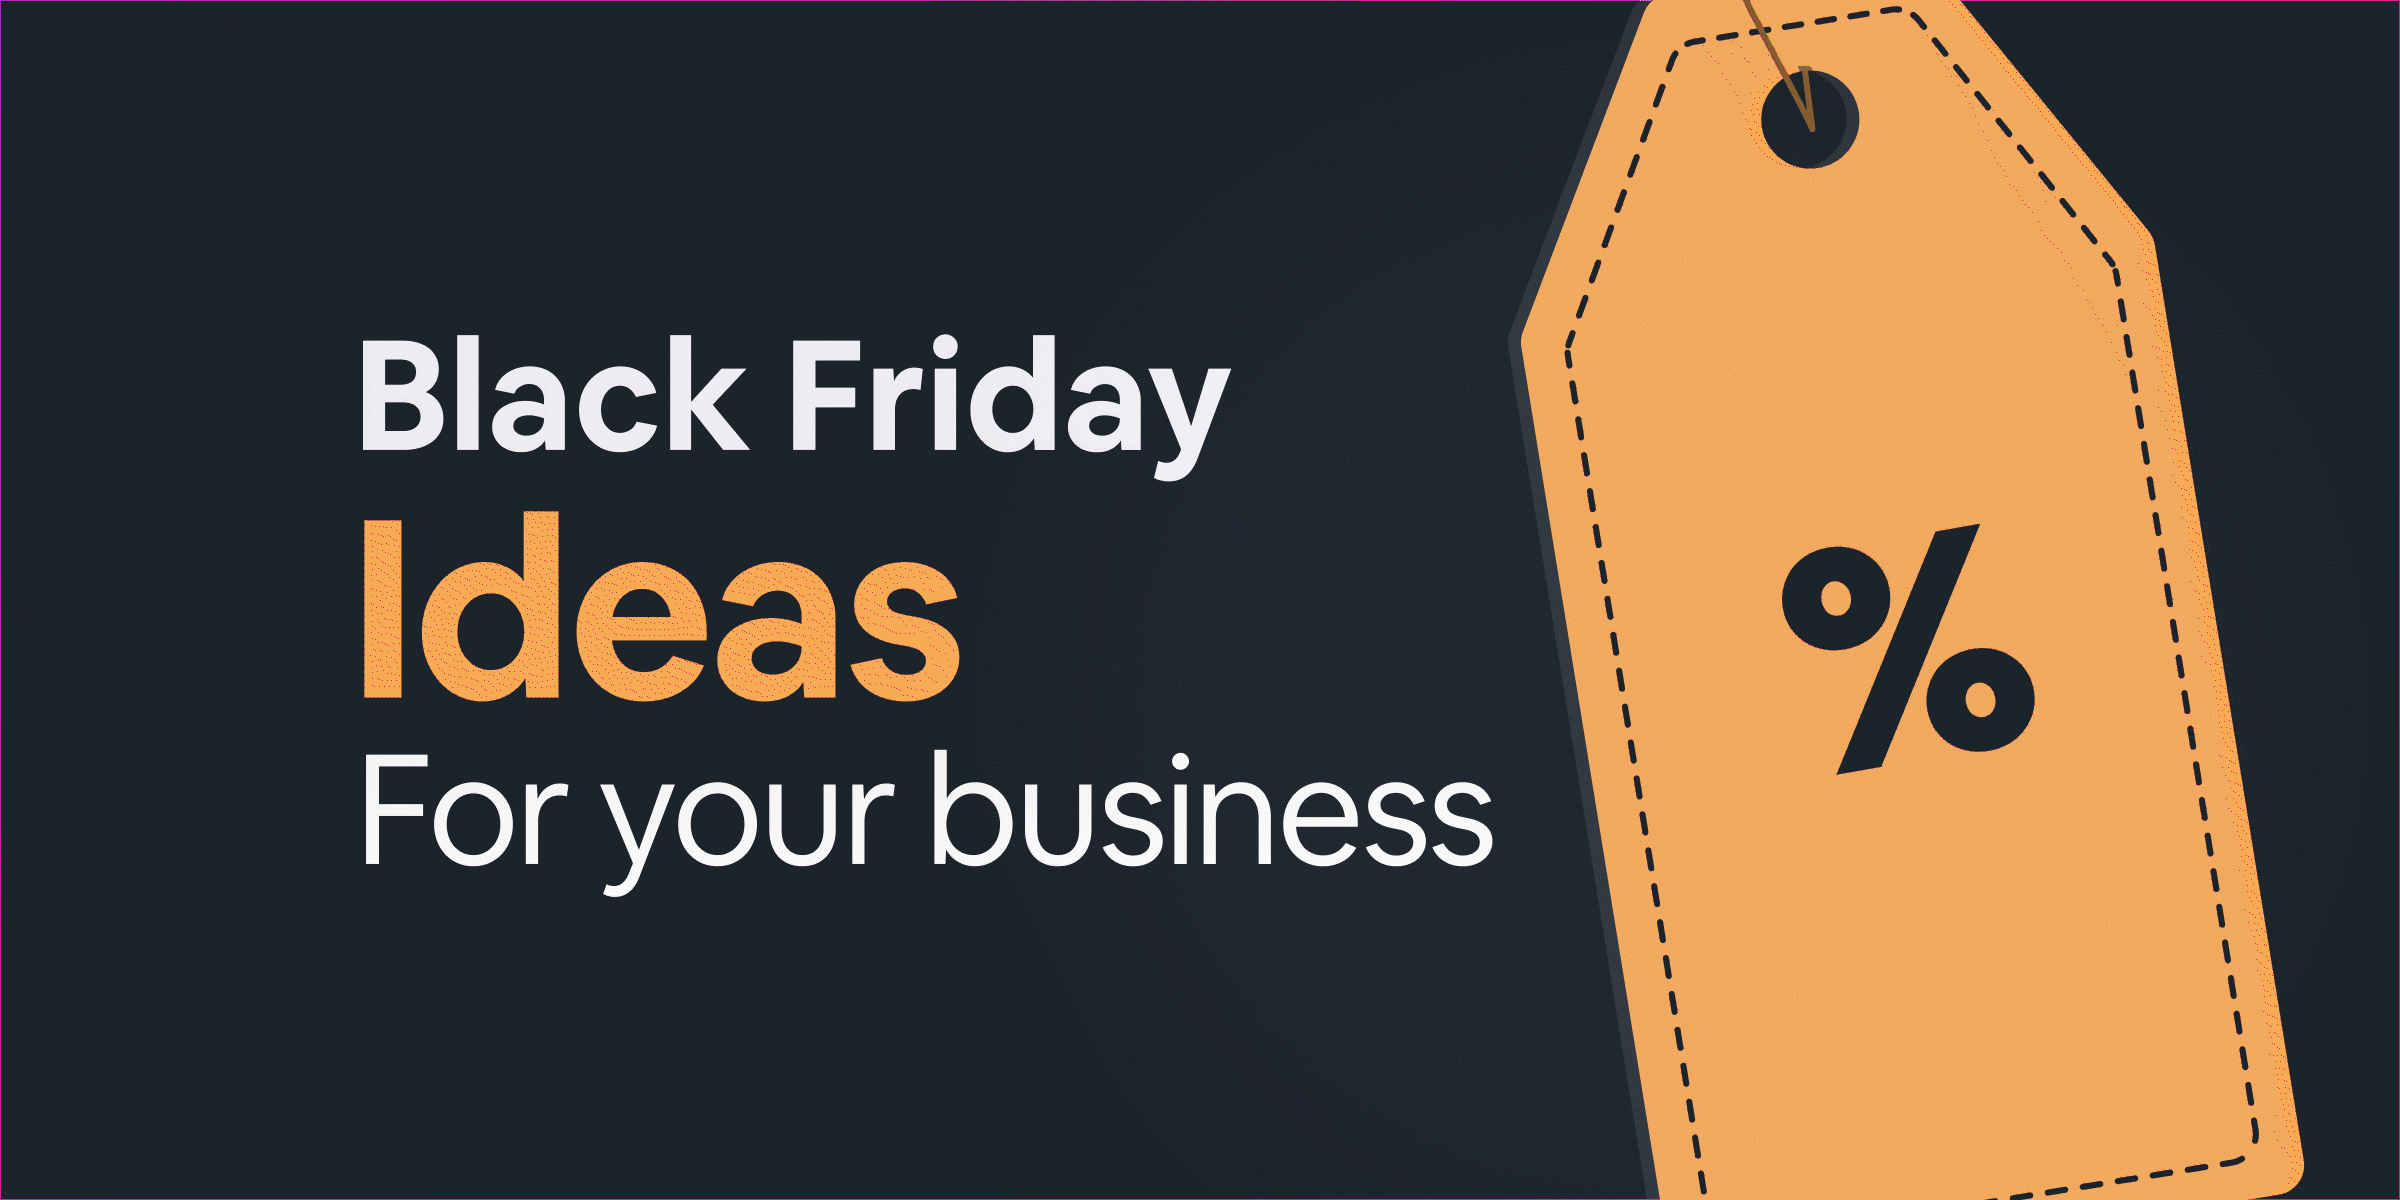 Most Successful Black Friday Ideas for Small Businesses in 2020